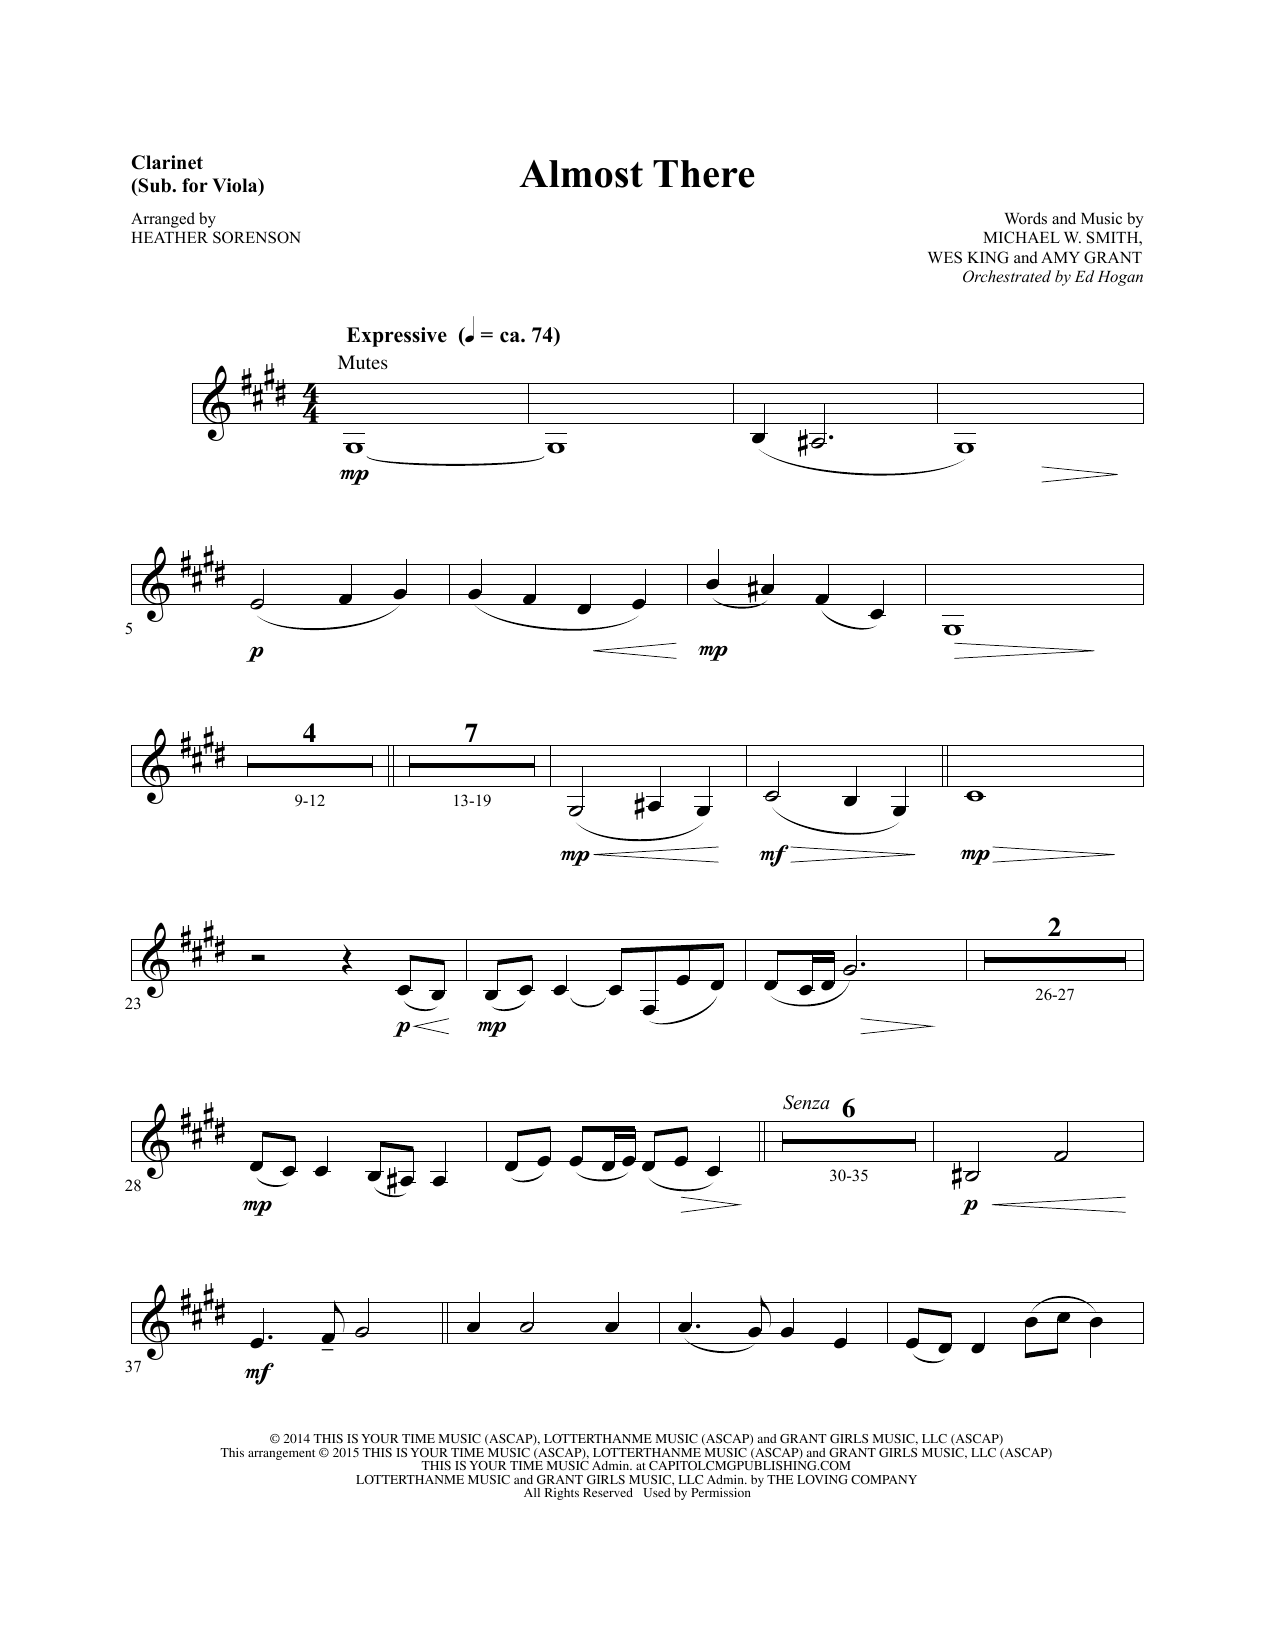 Heather Sorenson Almost There - Clarinet (sub Viola) sheet music notes and chords. Download Printable PDF.